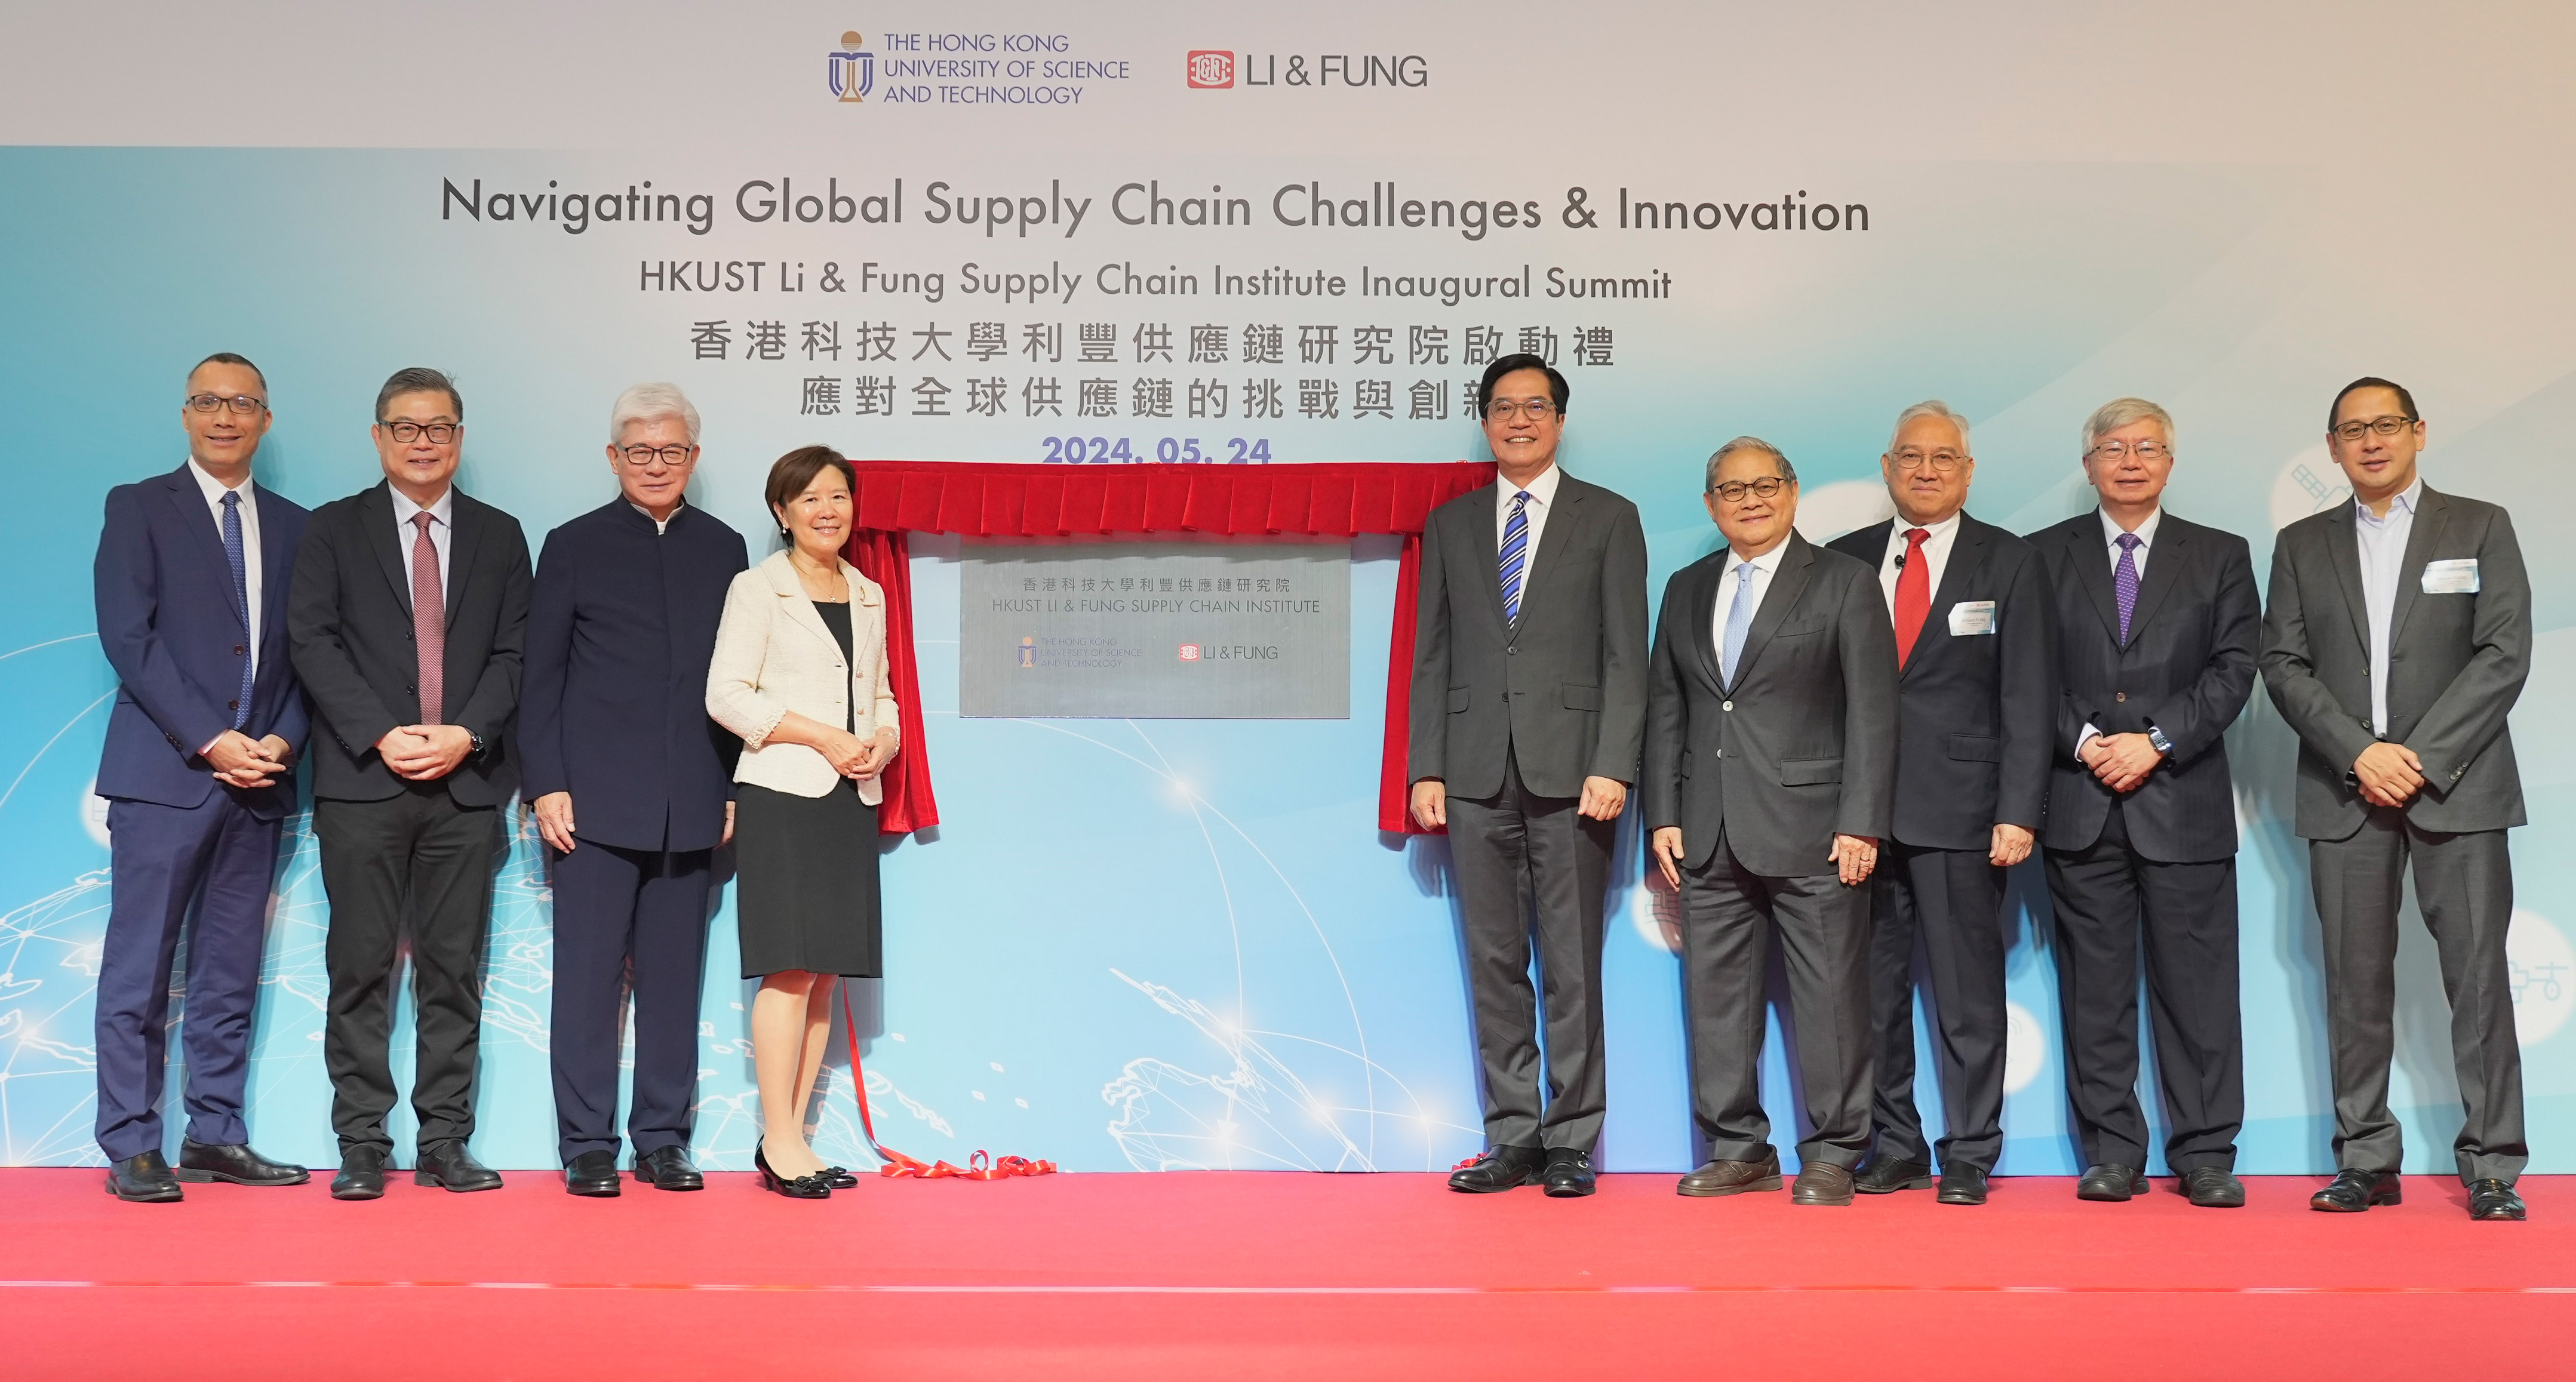 Mr. Michael WONG Wai-Lun, Acting Financial Secretary of the Government of the Hong Kong Special Administrative Region (fifth right); Prof. Nancy IP, HKUST President (fourth left); Dr. Victor FUNG, Group Chairman of the Fung Group (fourth right); Dr. Vincent LO, HKUST Honorary Court Chairman (third left); Dr. William FUNG, Group Deputy Chairman of the Fung Group (third right); Prof. TAM Kar-Yan, Dean of Business and Management, HKUST (second left); Prof. Hau LEE, Chair of the Institute’s Academic Committee (